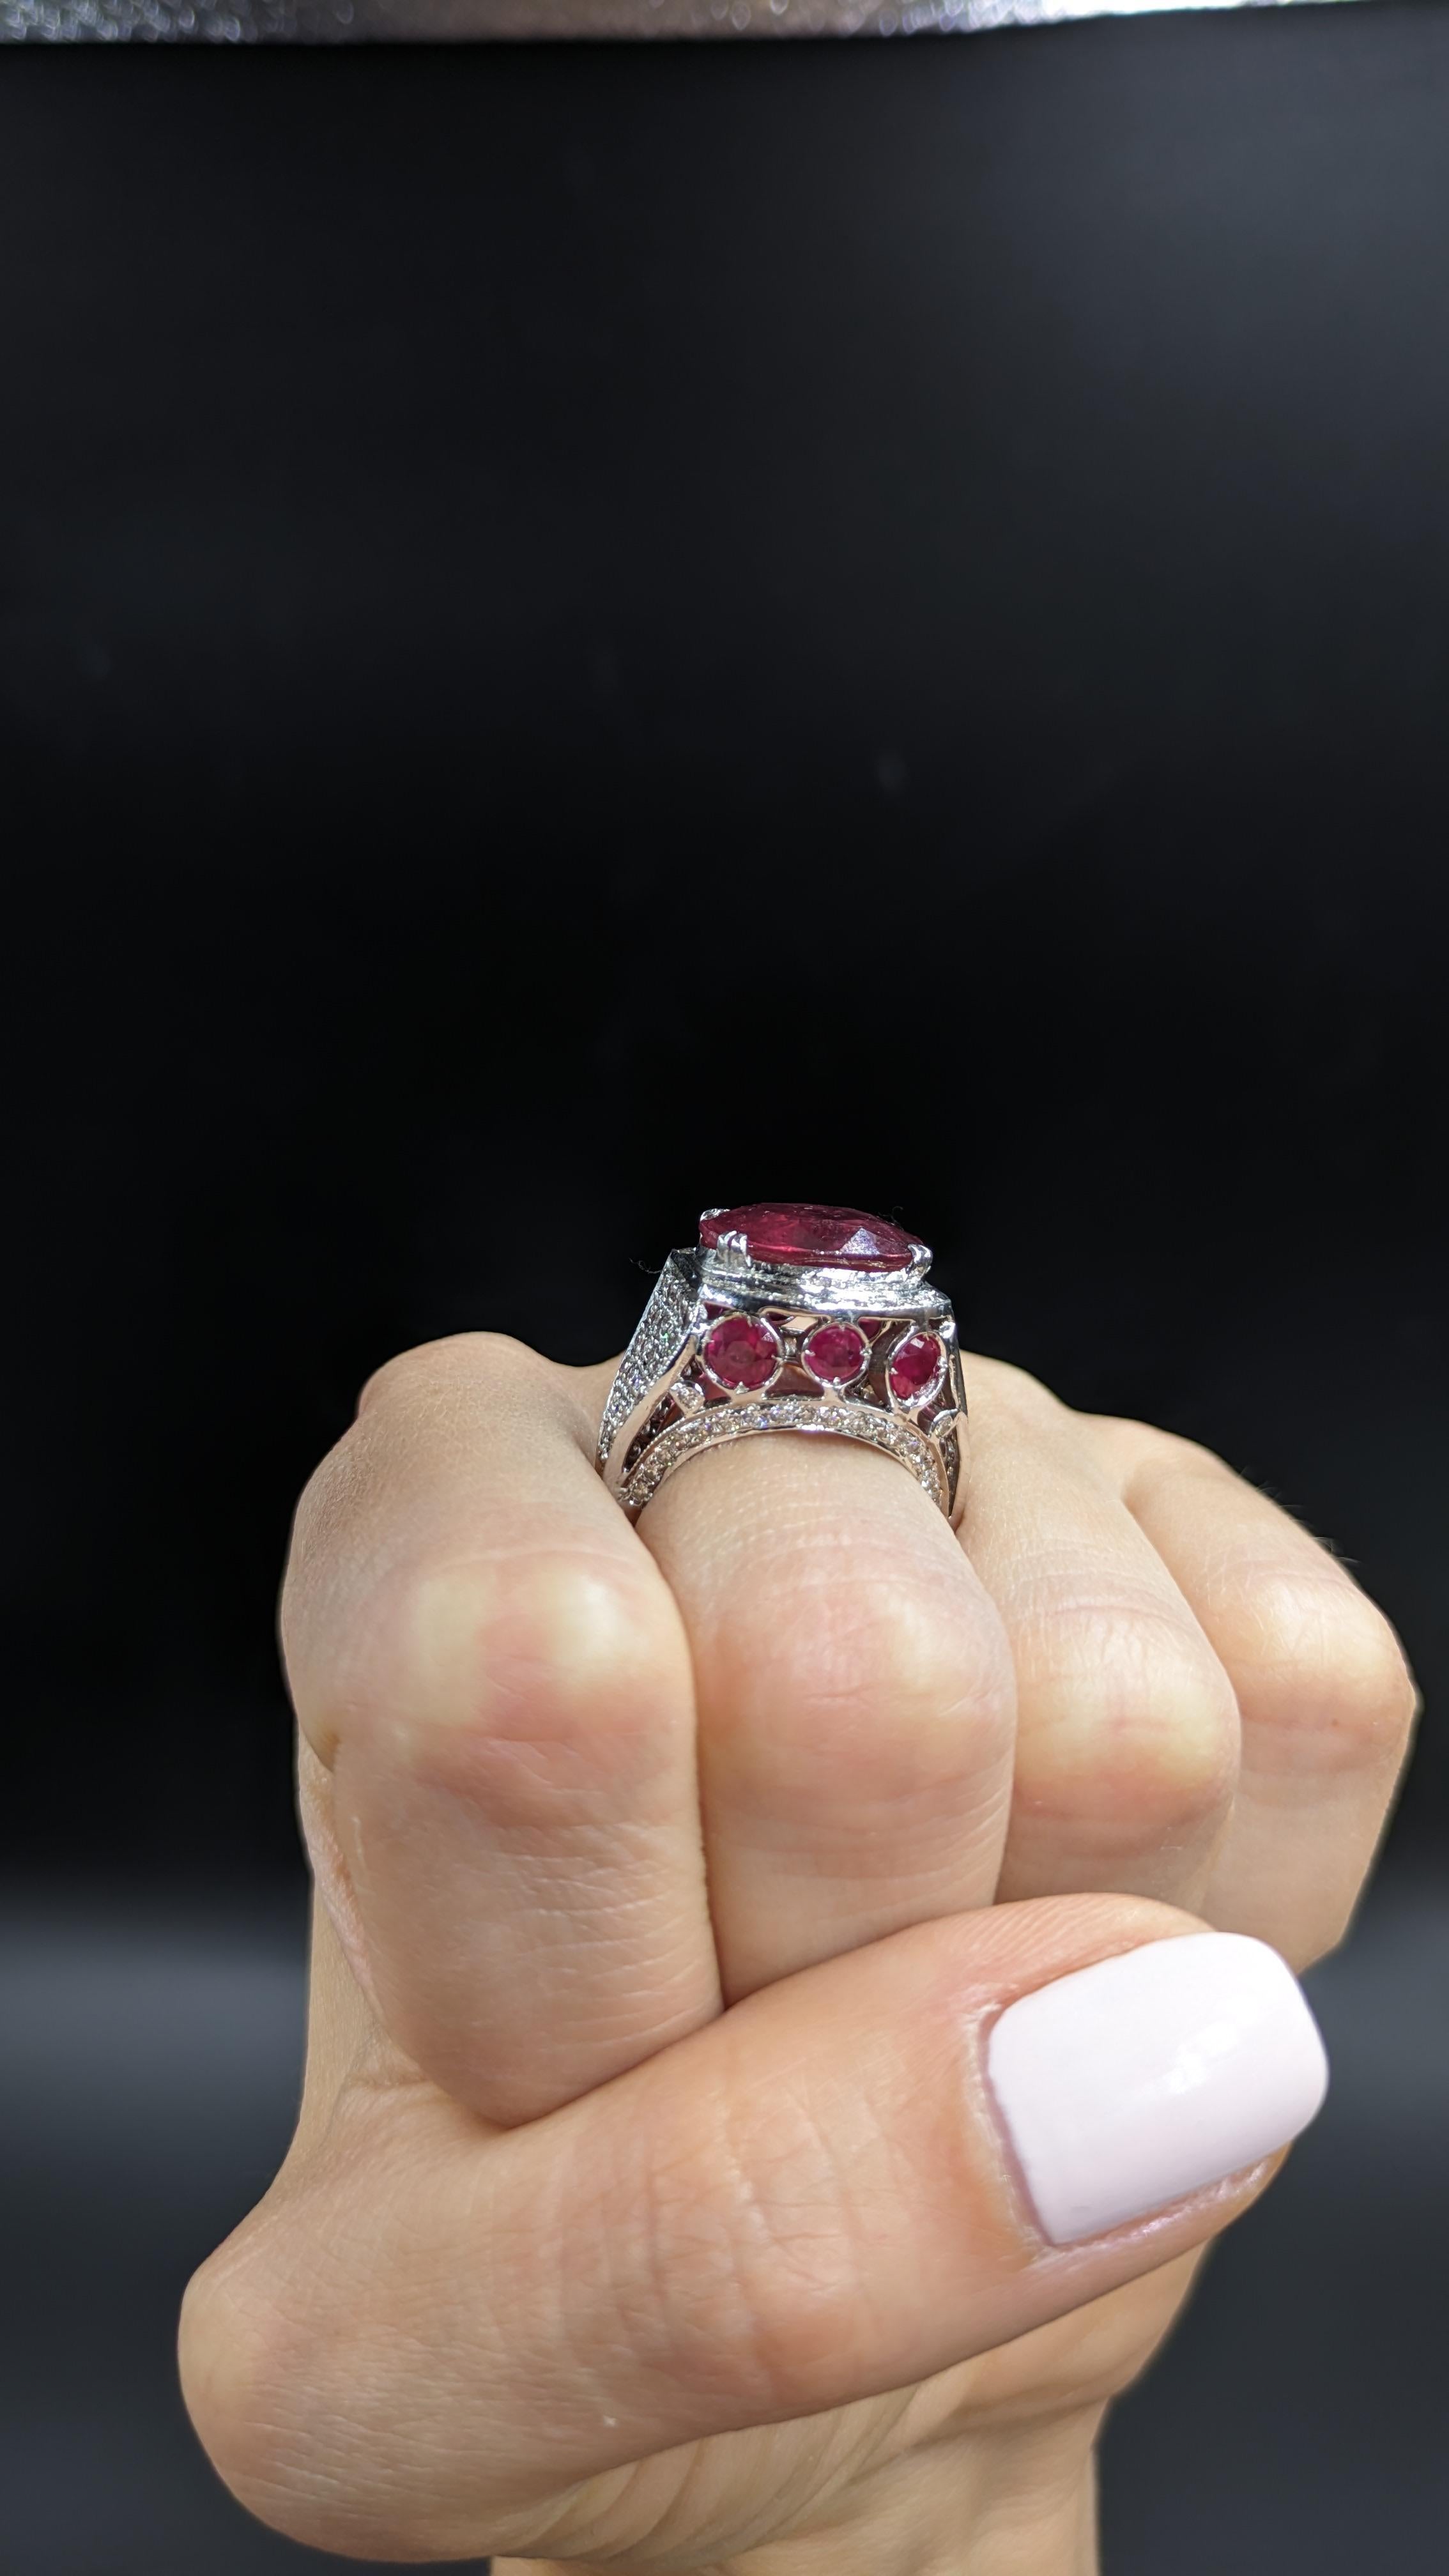 11 Carat Natural Ruby Ring and 2.3 carat Diamond Cocktail Ring For Sale 1